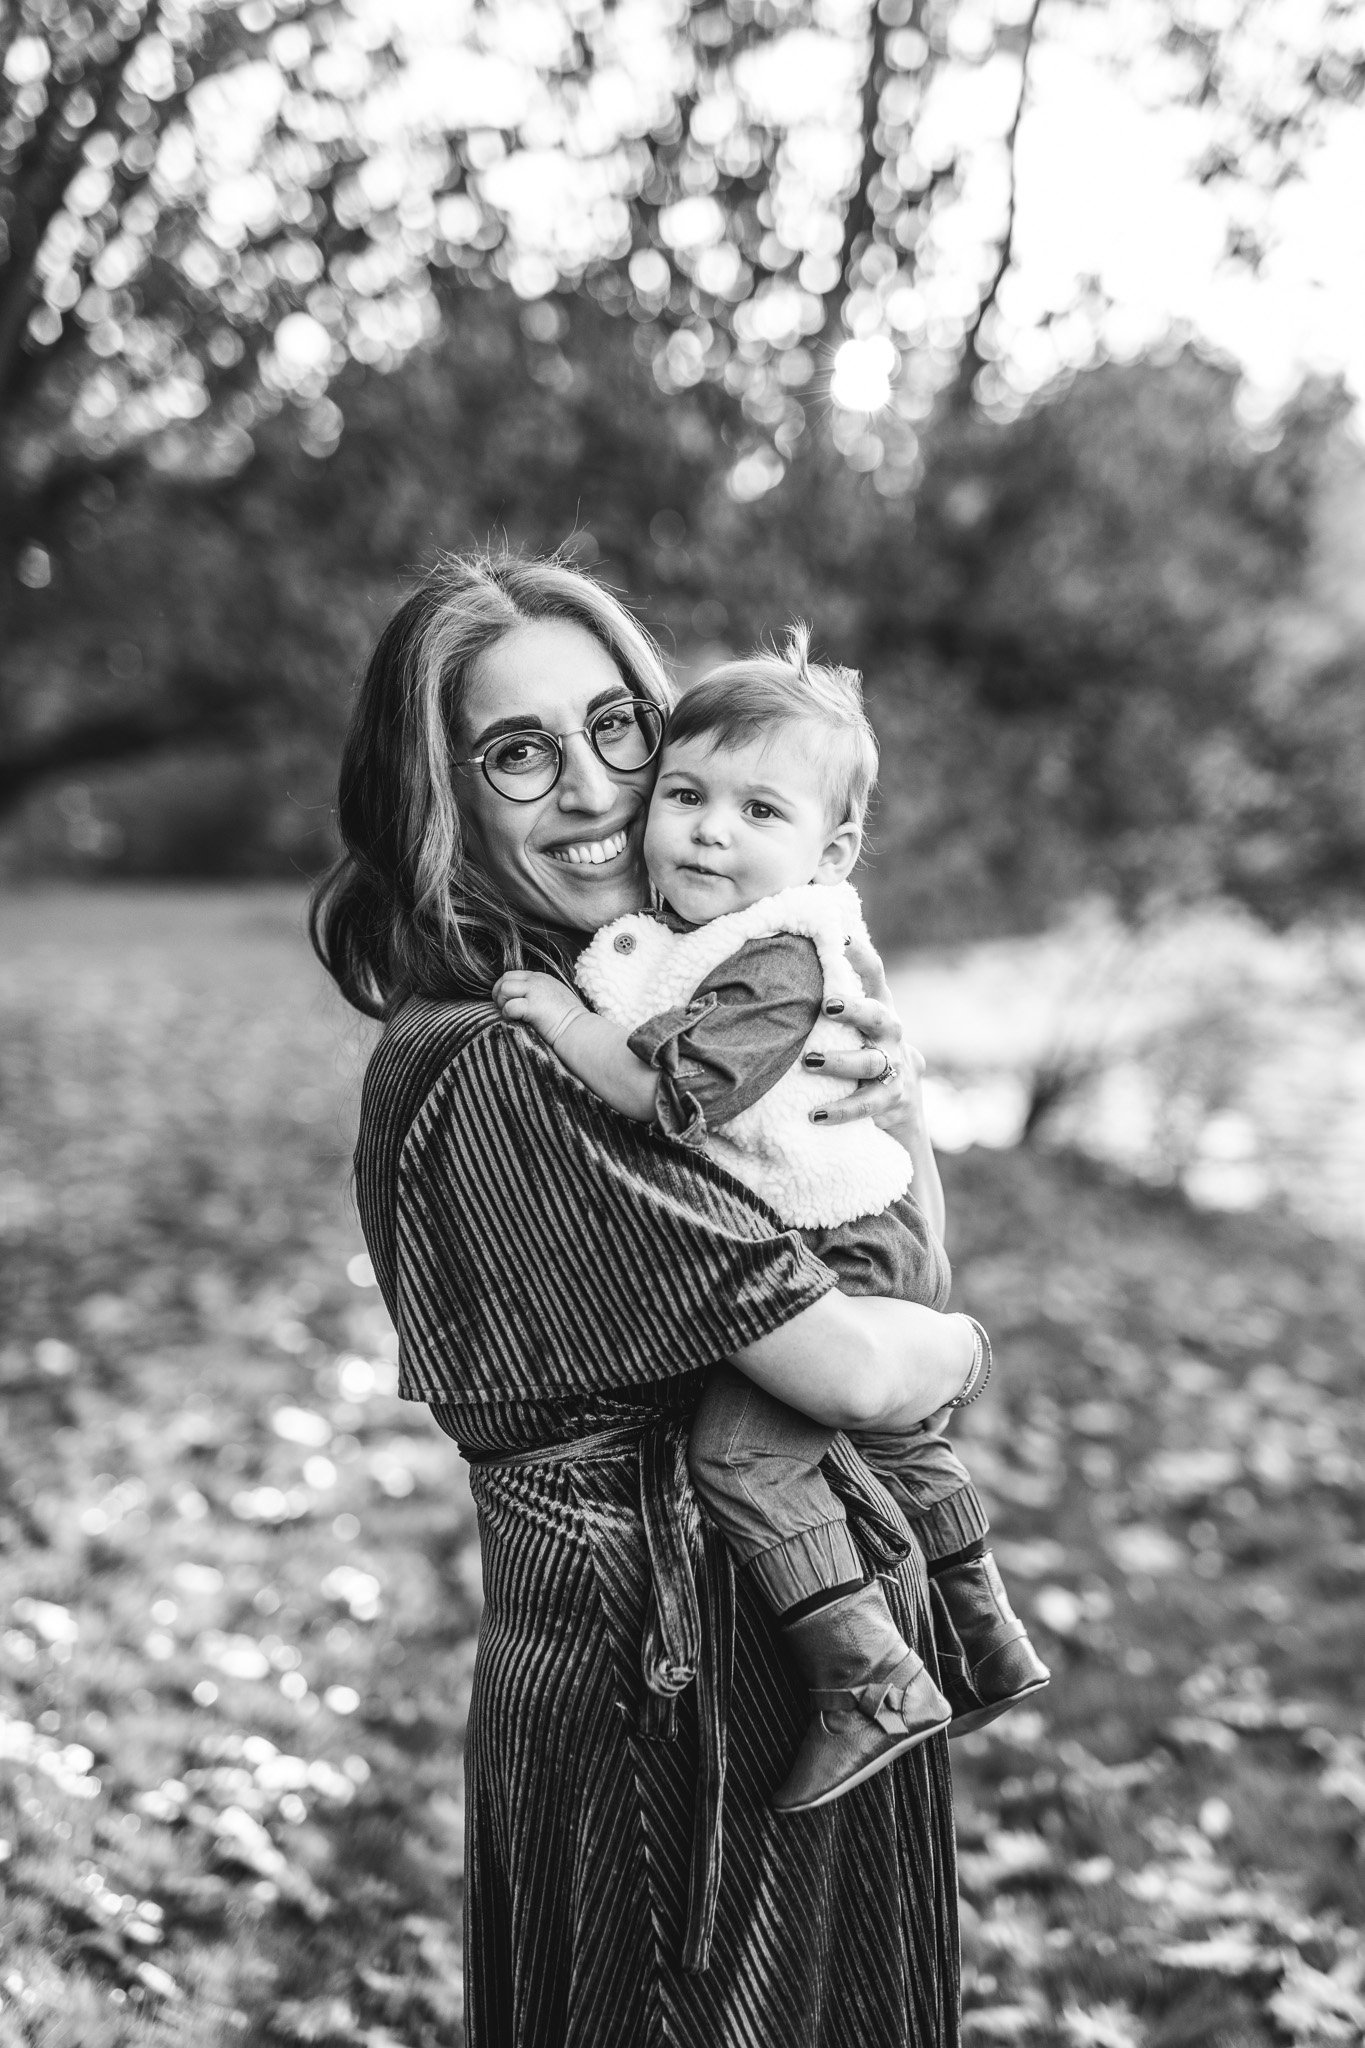  Dynamic and moody mother and baby portrait in the NJ fall leaves by Nicole Hawkins Photography. mother and baby dynamic #NicoleHawkinsPhotography #NicoleHawkinsFamily #fallfamilyphotos #fallphotos #familyphotographerNJ #NJfallfamilypics 